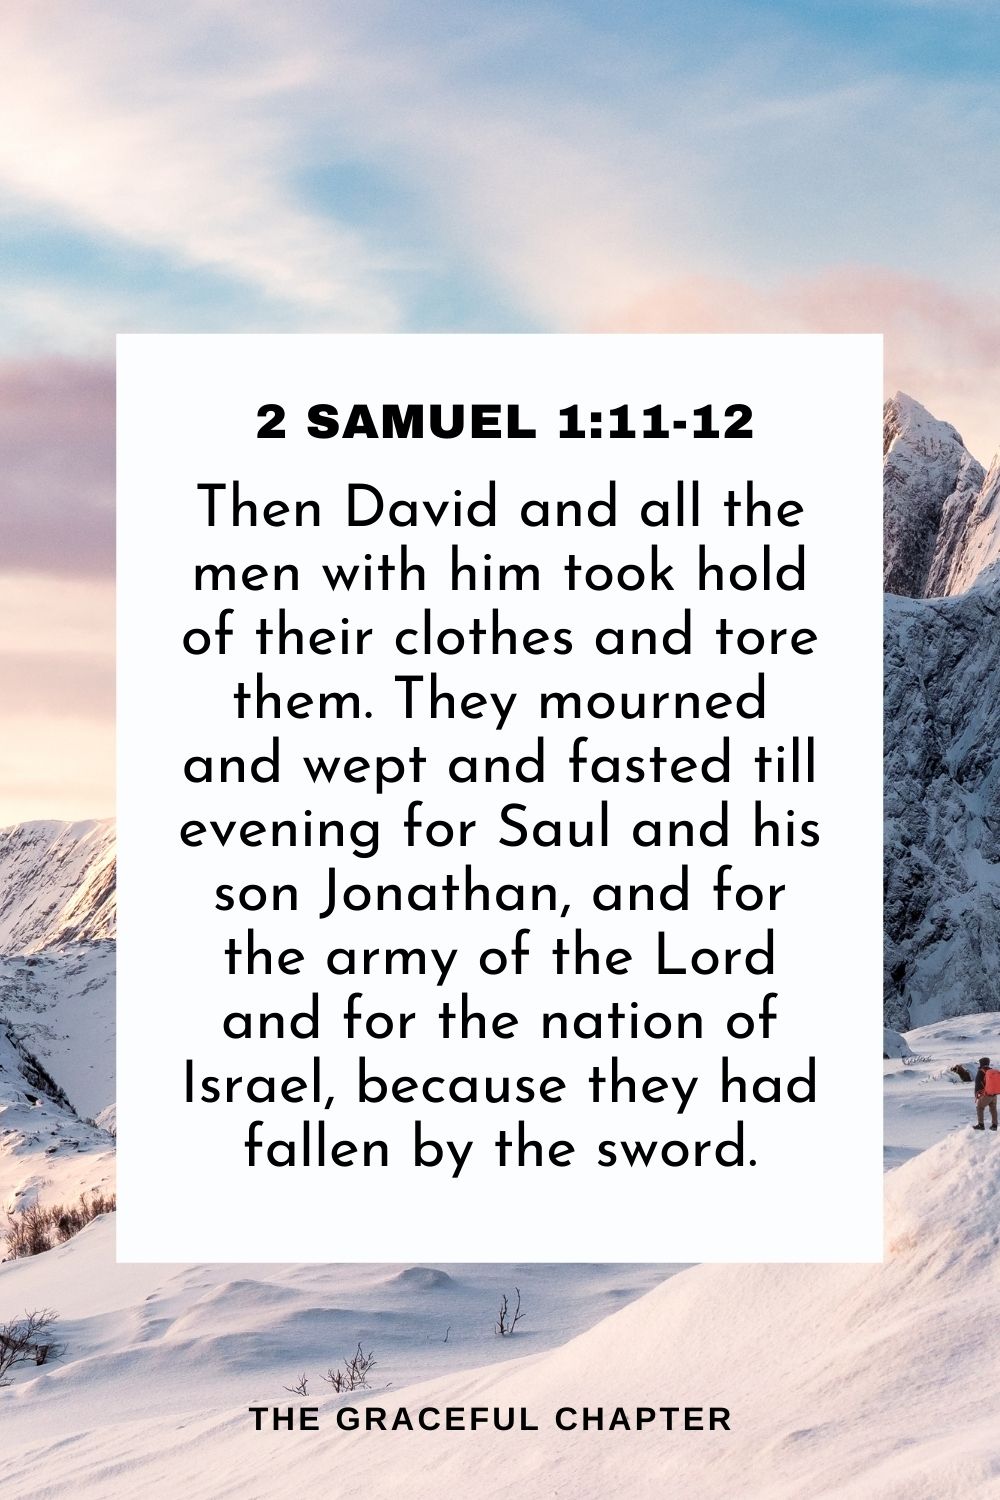 Then David and all the men with him took hold of their clothes and tore them. They mourned and wept and fasted till evening for Saul and his son Jonathan, and for the army of the Lord and for the nation of Israel, because they had fallen by the sword. 2 Samuel 1:11-12